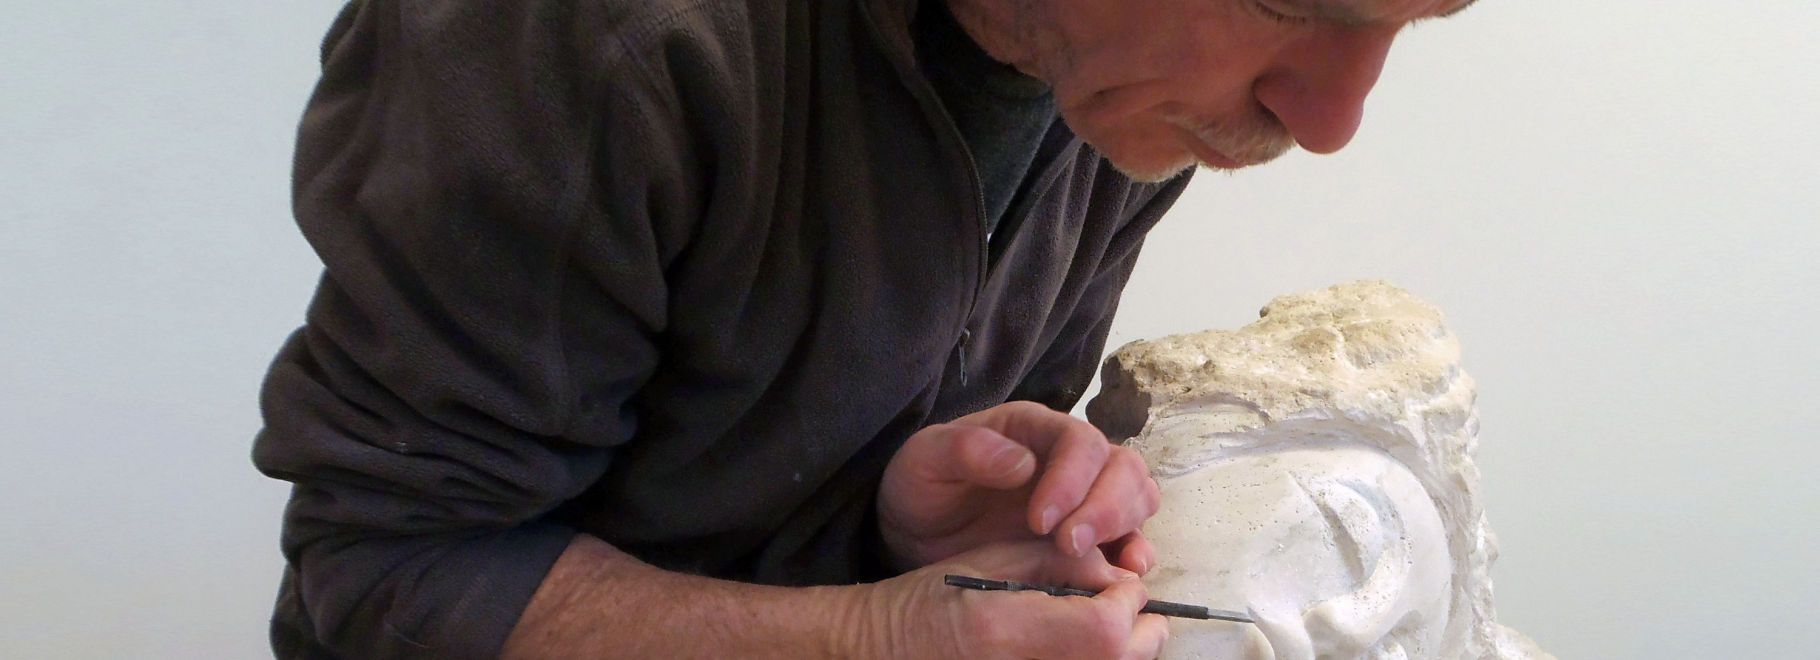 Chris Beaudry working in stone. Carving / sculpting in the studio. A photo detail.